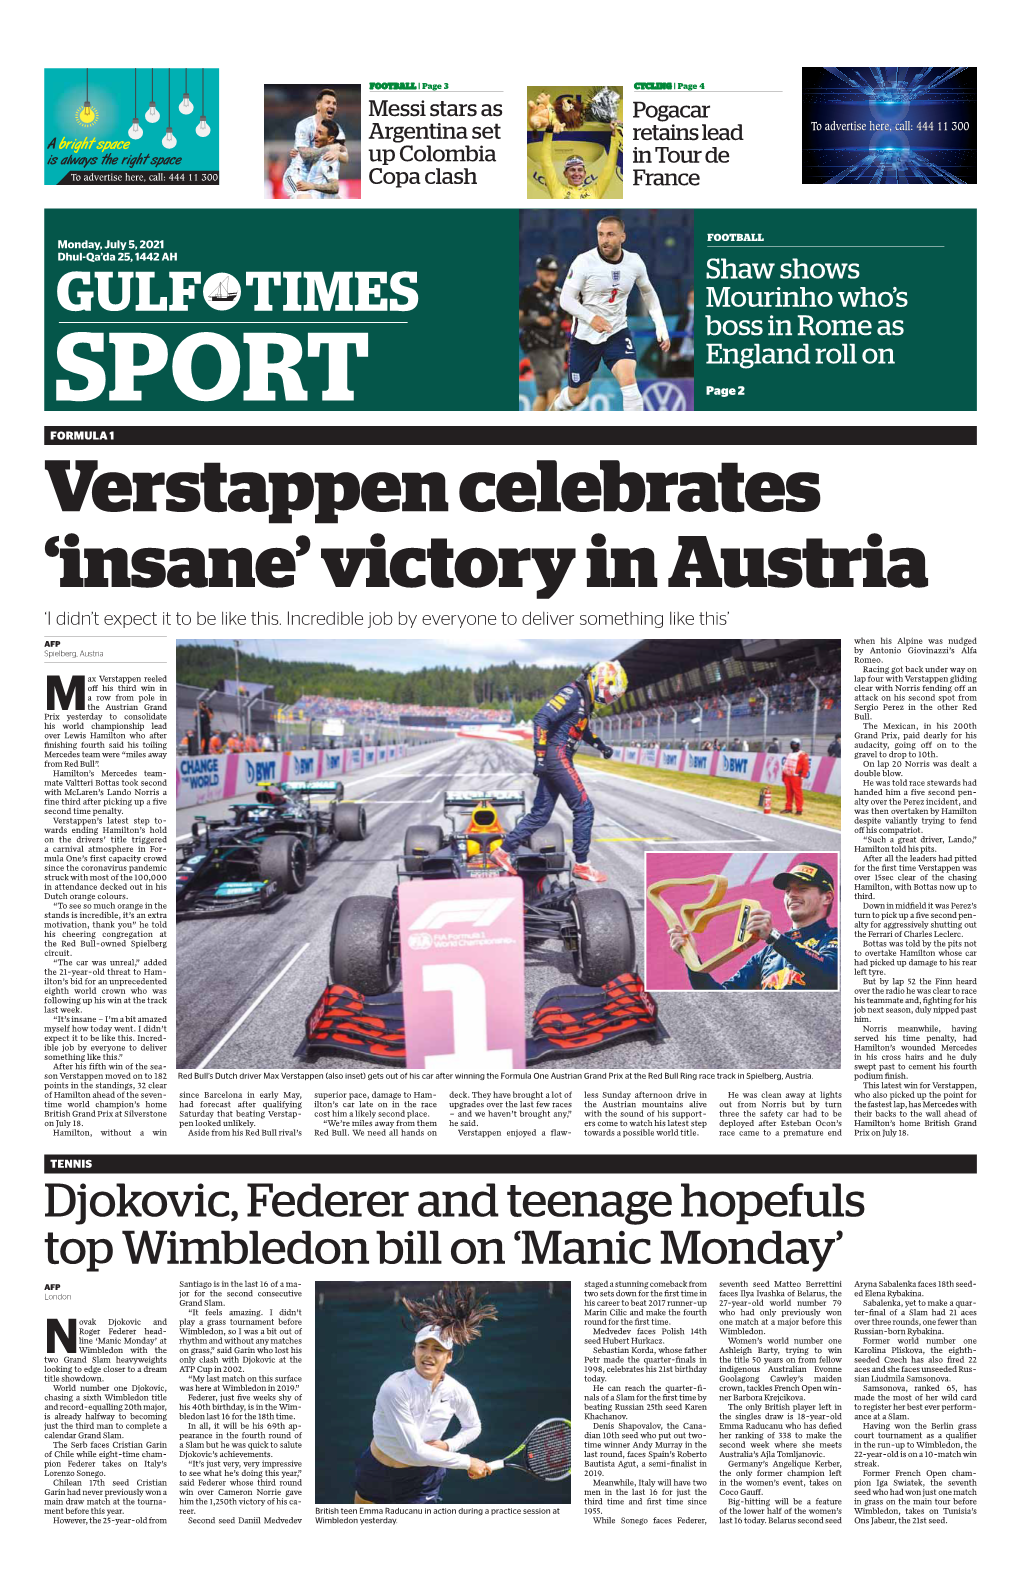 SPORT Page 2 FORMULA 1 Verstappen Celebrates ‘Insane’ Victory in Austria ‘I Didn’T Expect It to Be Like This